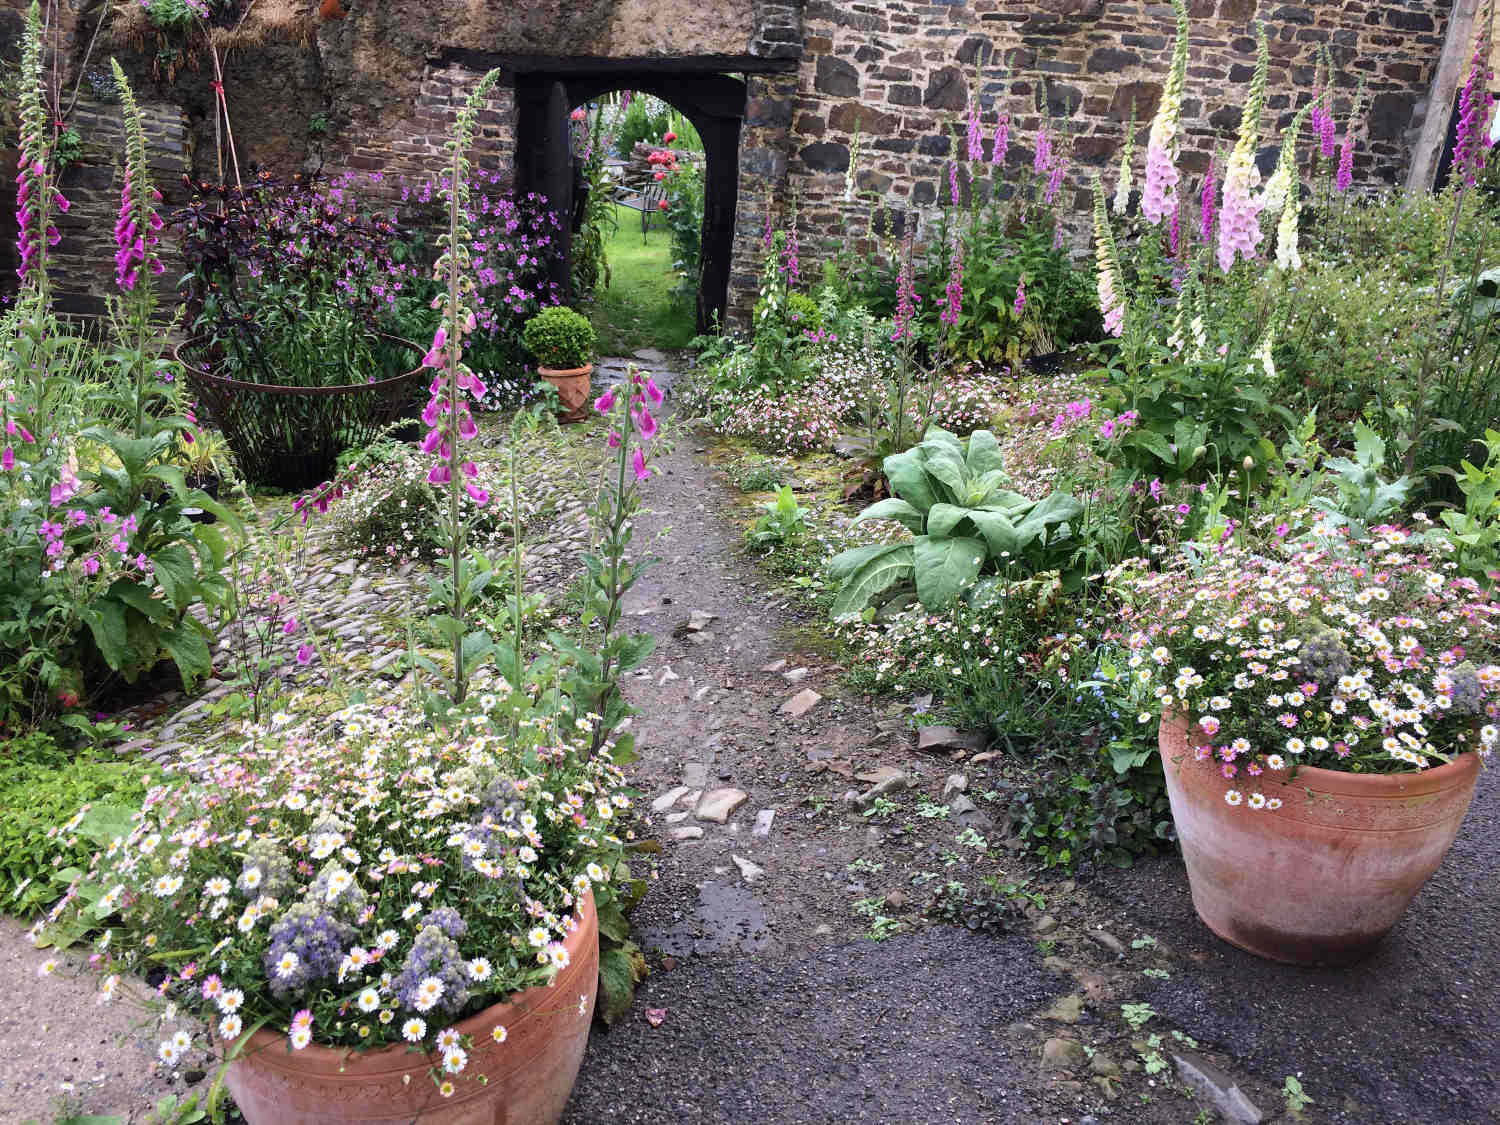 Image showing potted and bedded plants at Frizenham Farmhouse leading to an archway in the background.